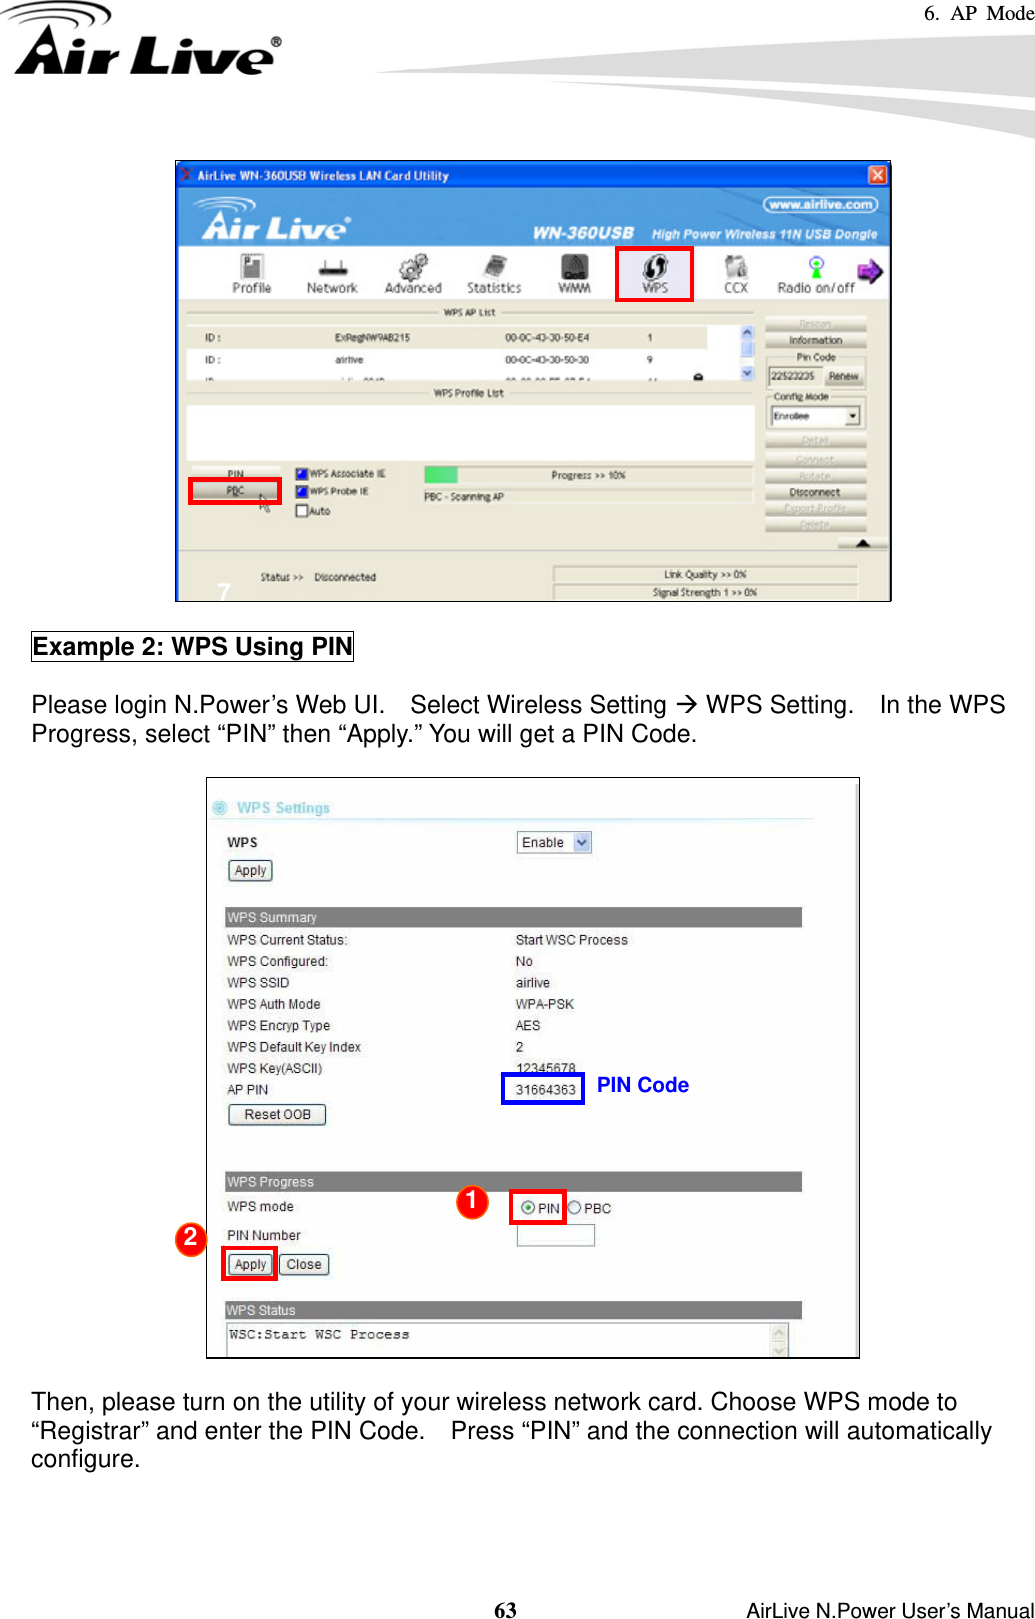 6. AP Mode  63                    AirLive N.Power User’s Manual   Example 2: WPS Using PIN  Please login N.Power’s Web UI.    Select Wireless Setting Æ WPS Setting.    In the WPS Progress, select “PIN” then “Apply.” You will get a PIN Code.      Then, please turn on the utility of your wireless network card. Choose WPS mode to “Registrar” and enter the PIN Code.    Press “PIN” and the connection will automatically configure.   67 PIN Code 1 2 